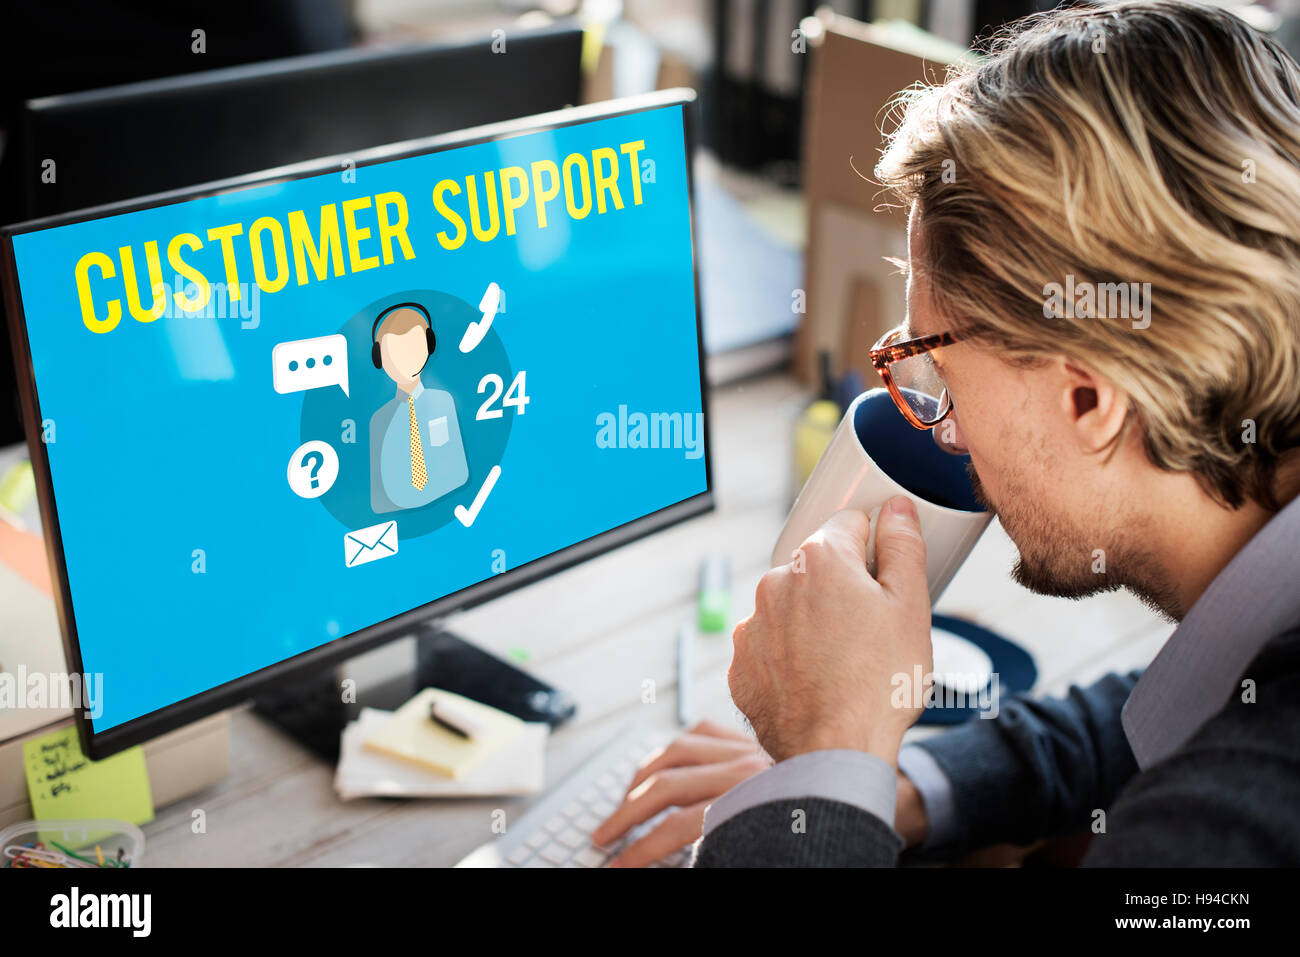 Customer Support Contact Center Advice Concept Stock Photo